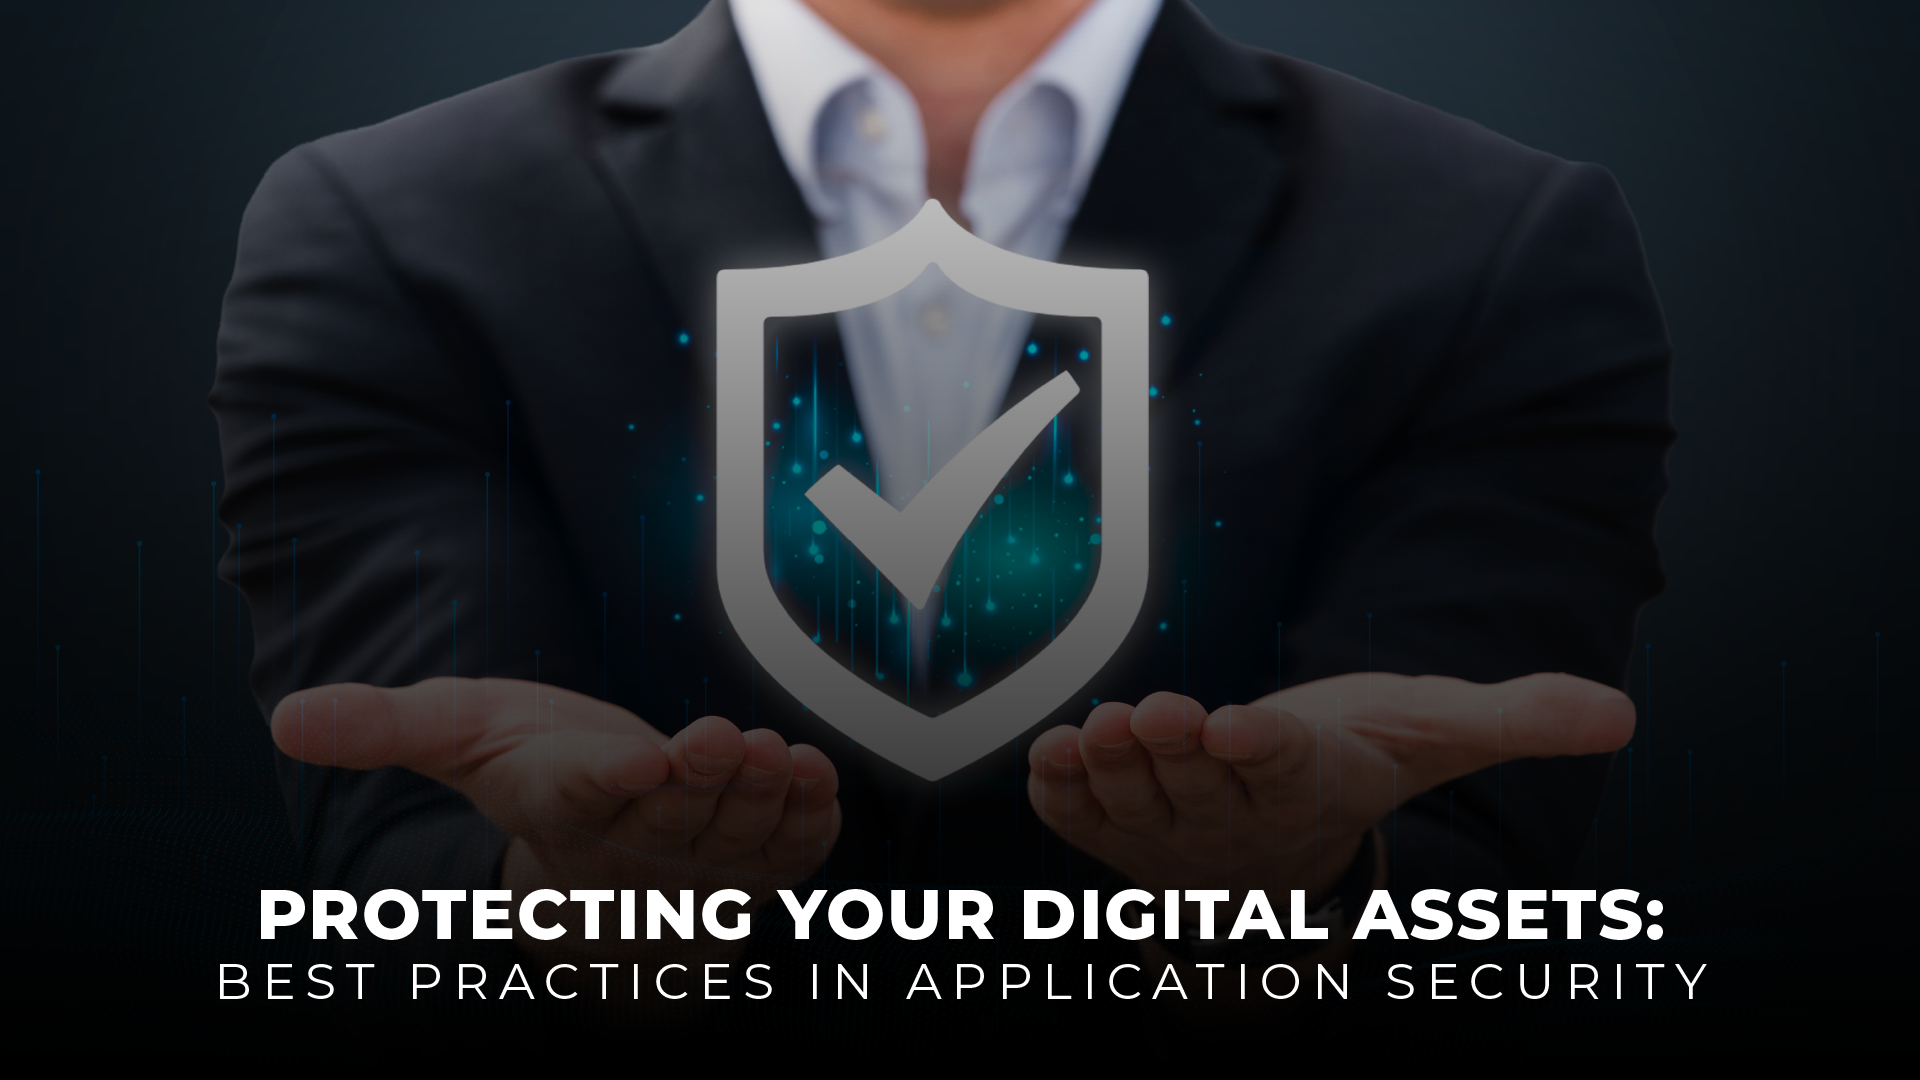 Protecting Your Digital Assets Best Practices in Application Security